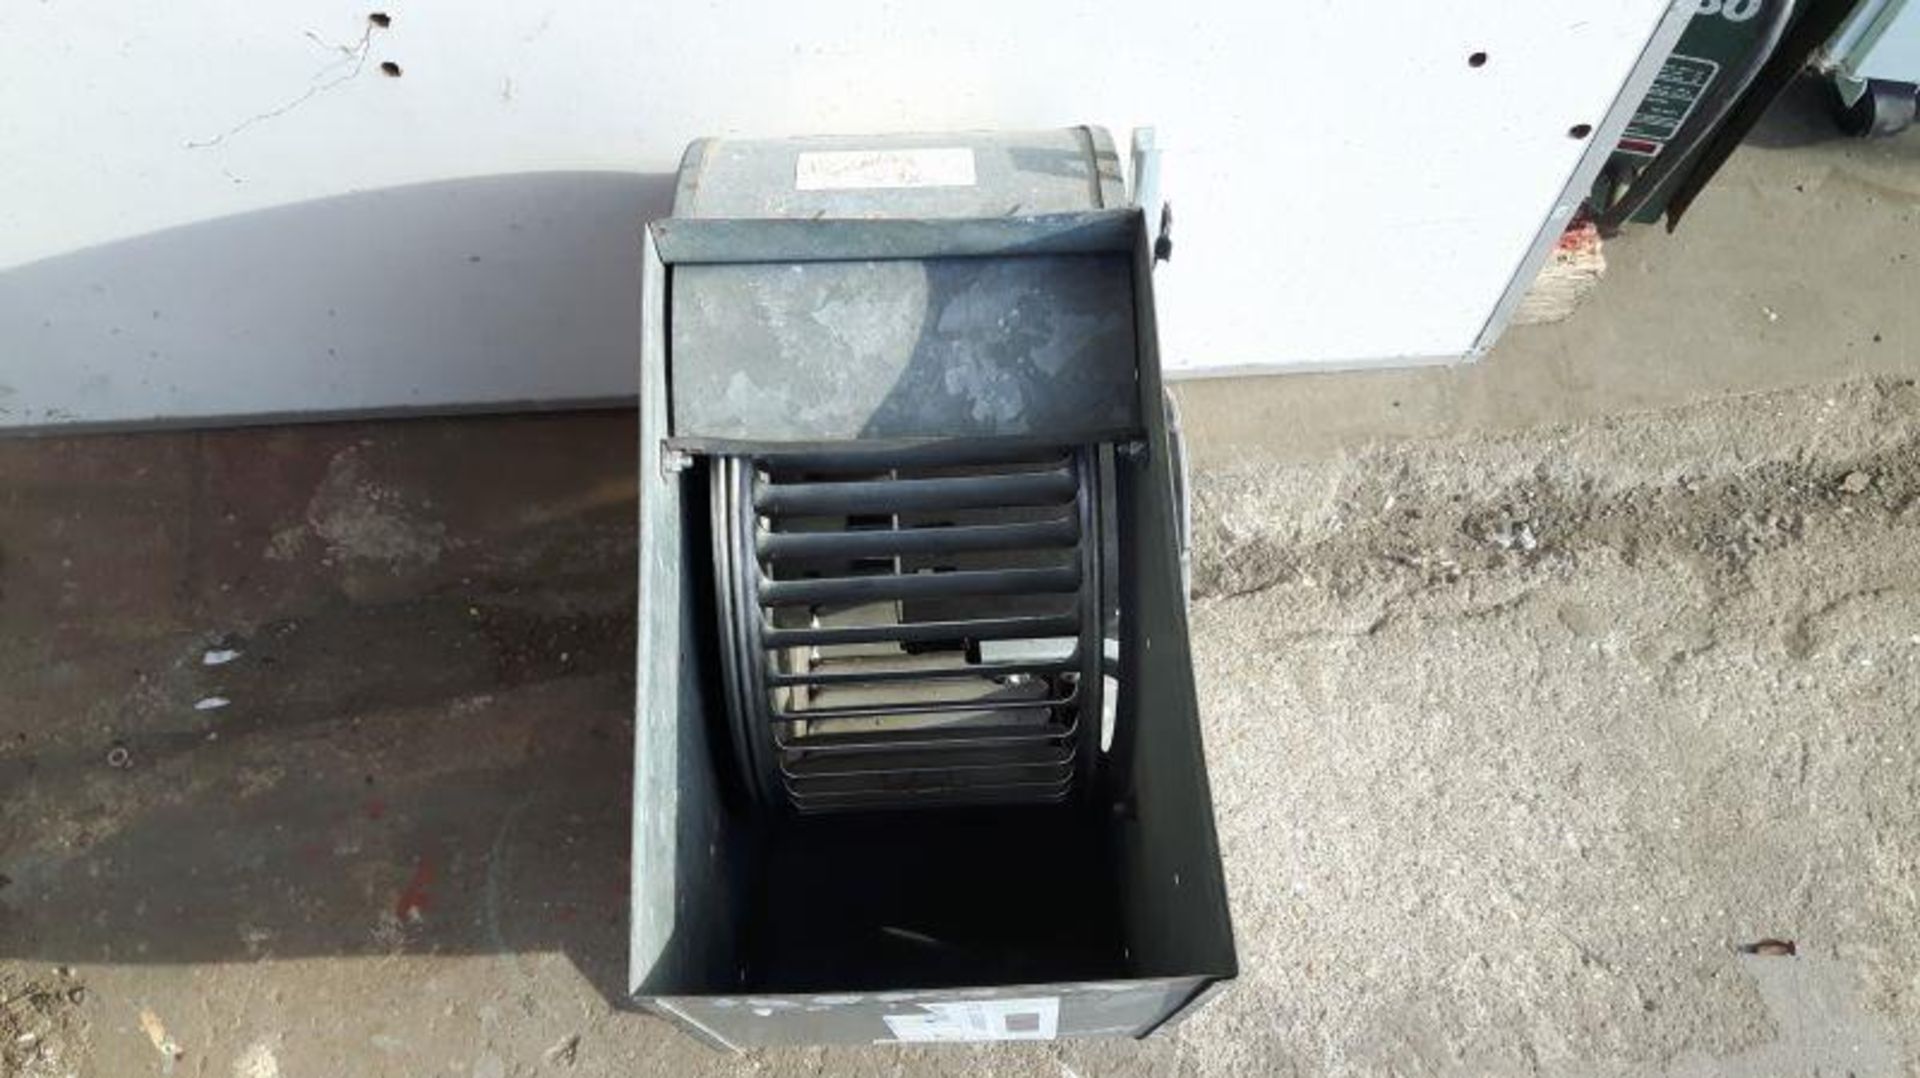 * 4 x Industrial fan units. Please note there is a £5 + VAT Lift Out fee on this lot. This lot is